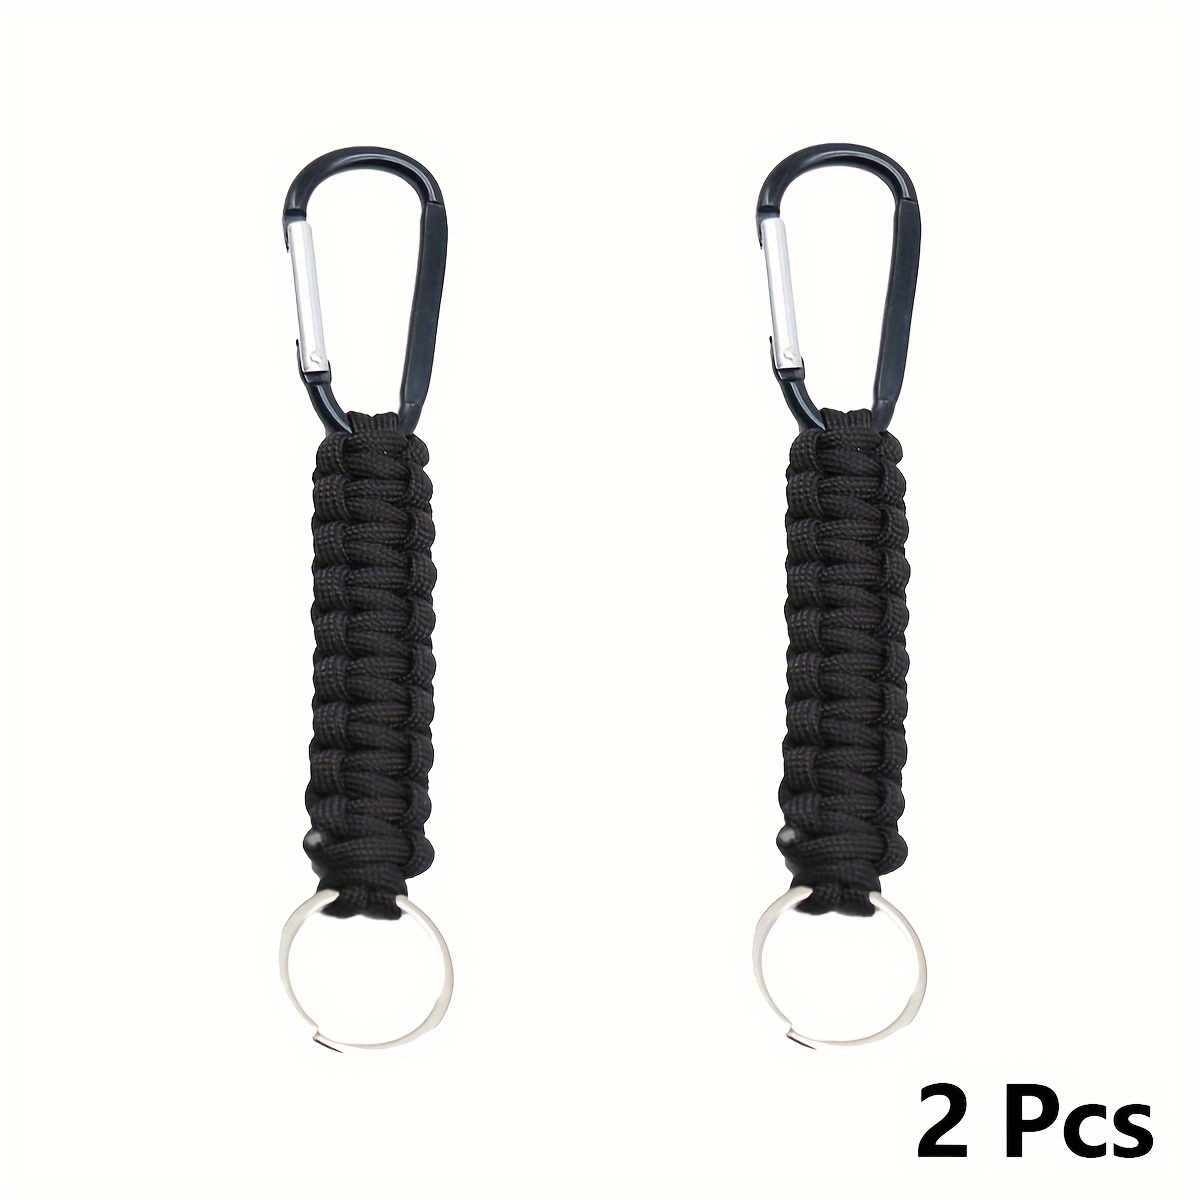 10pcs, Aluminum Alloy Carabiner Keychain Keyring, D-ring Spring Snap Hook  Key Chain Buckle For Outdoor Camping Hiking